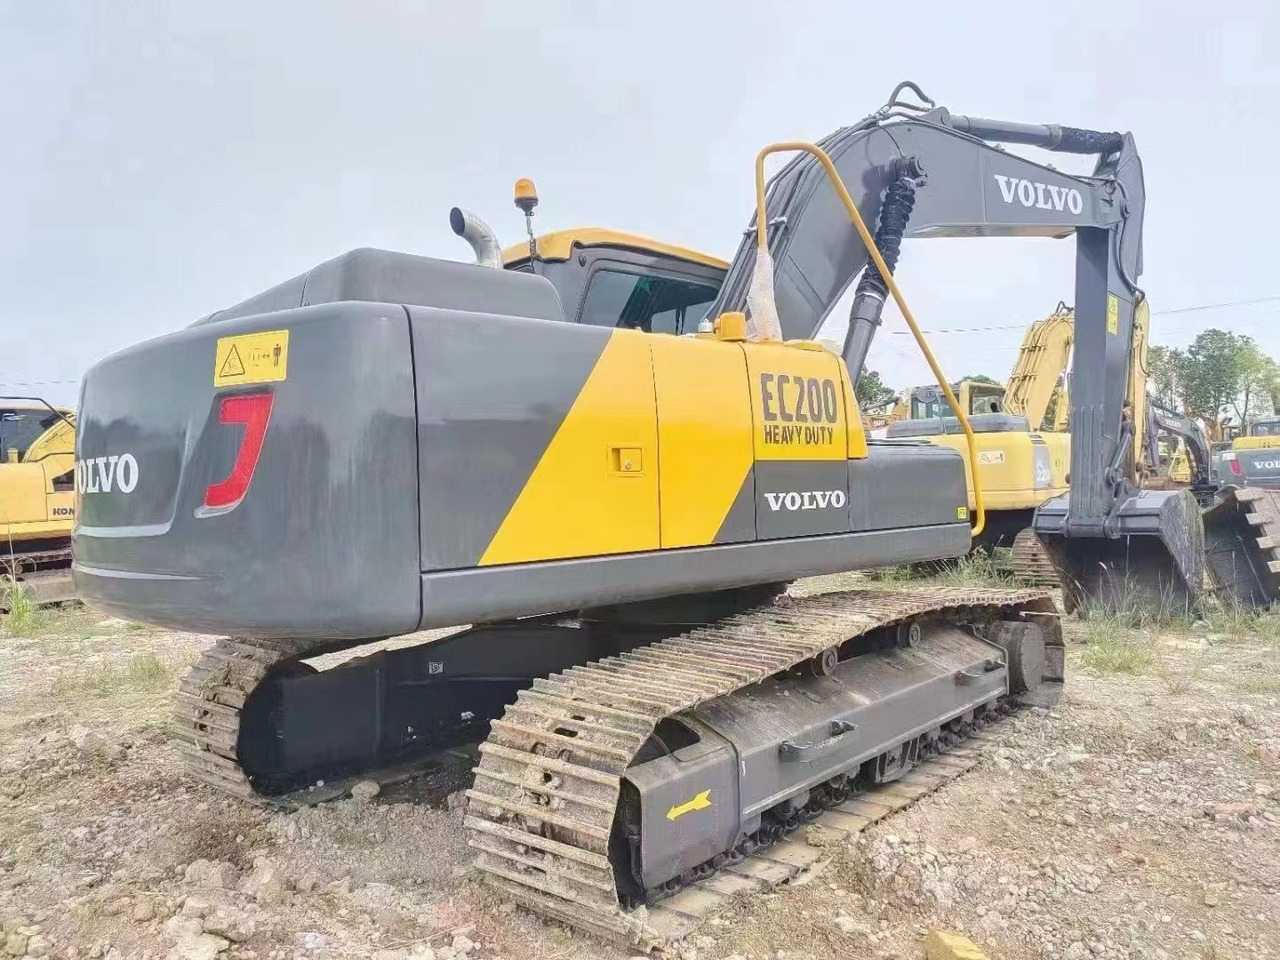 Pelle sur chenille Used excavator VOLVO EC200, Large engineering construction machinery good condition on sale: photos 4